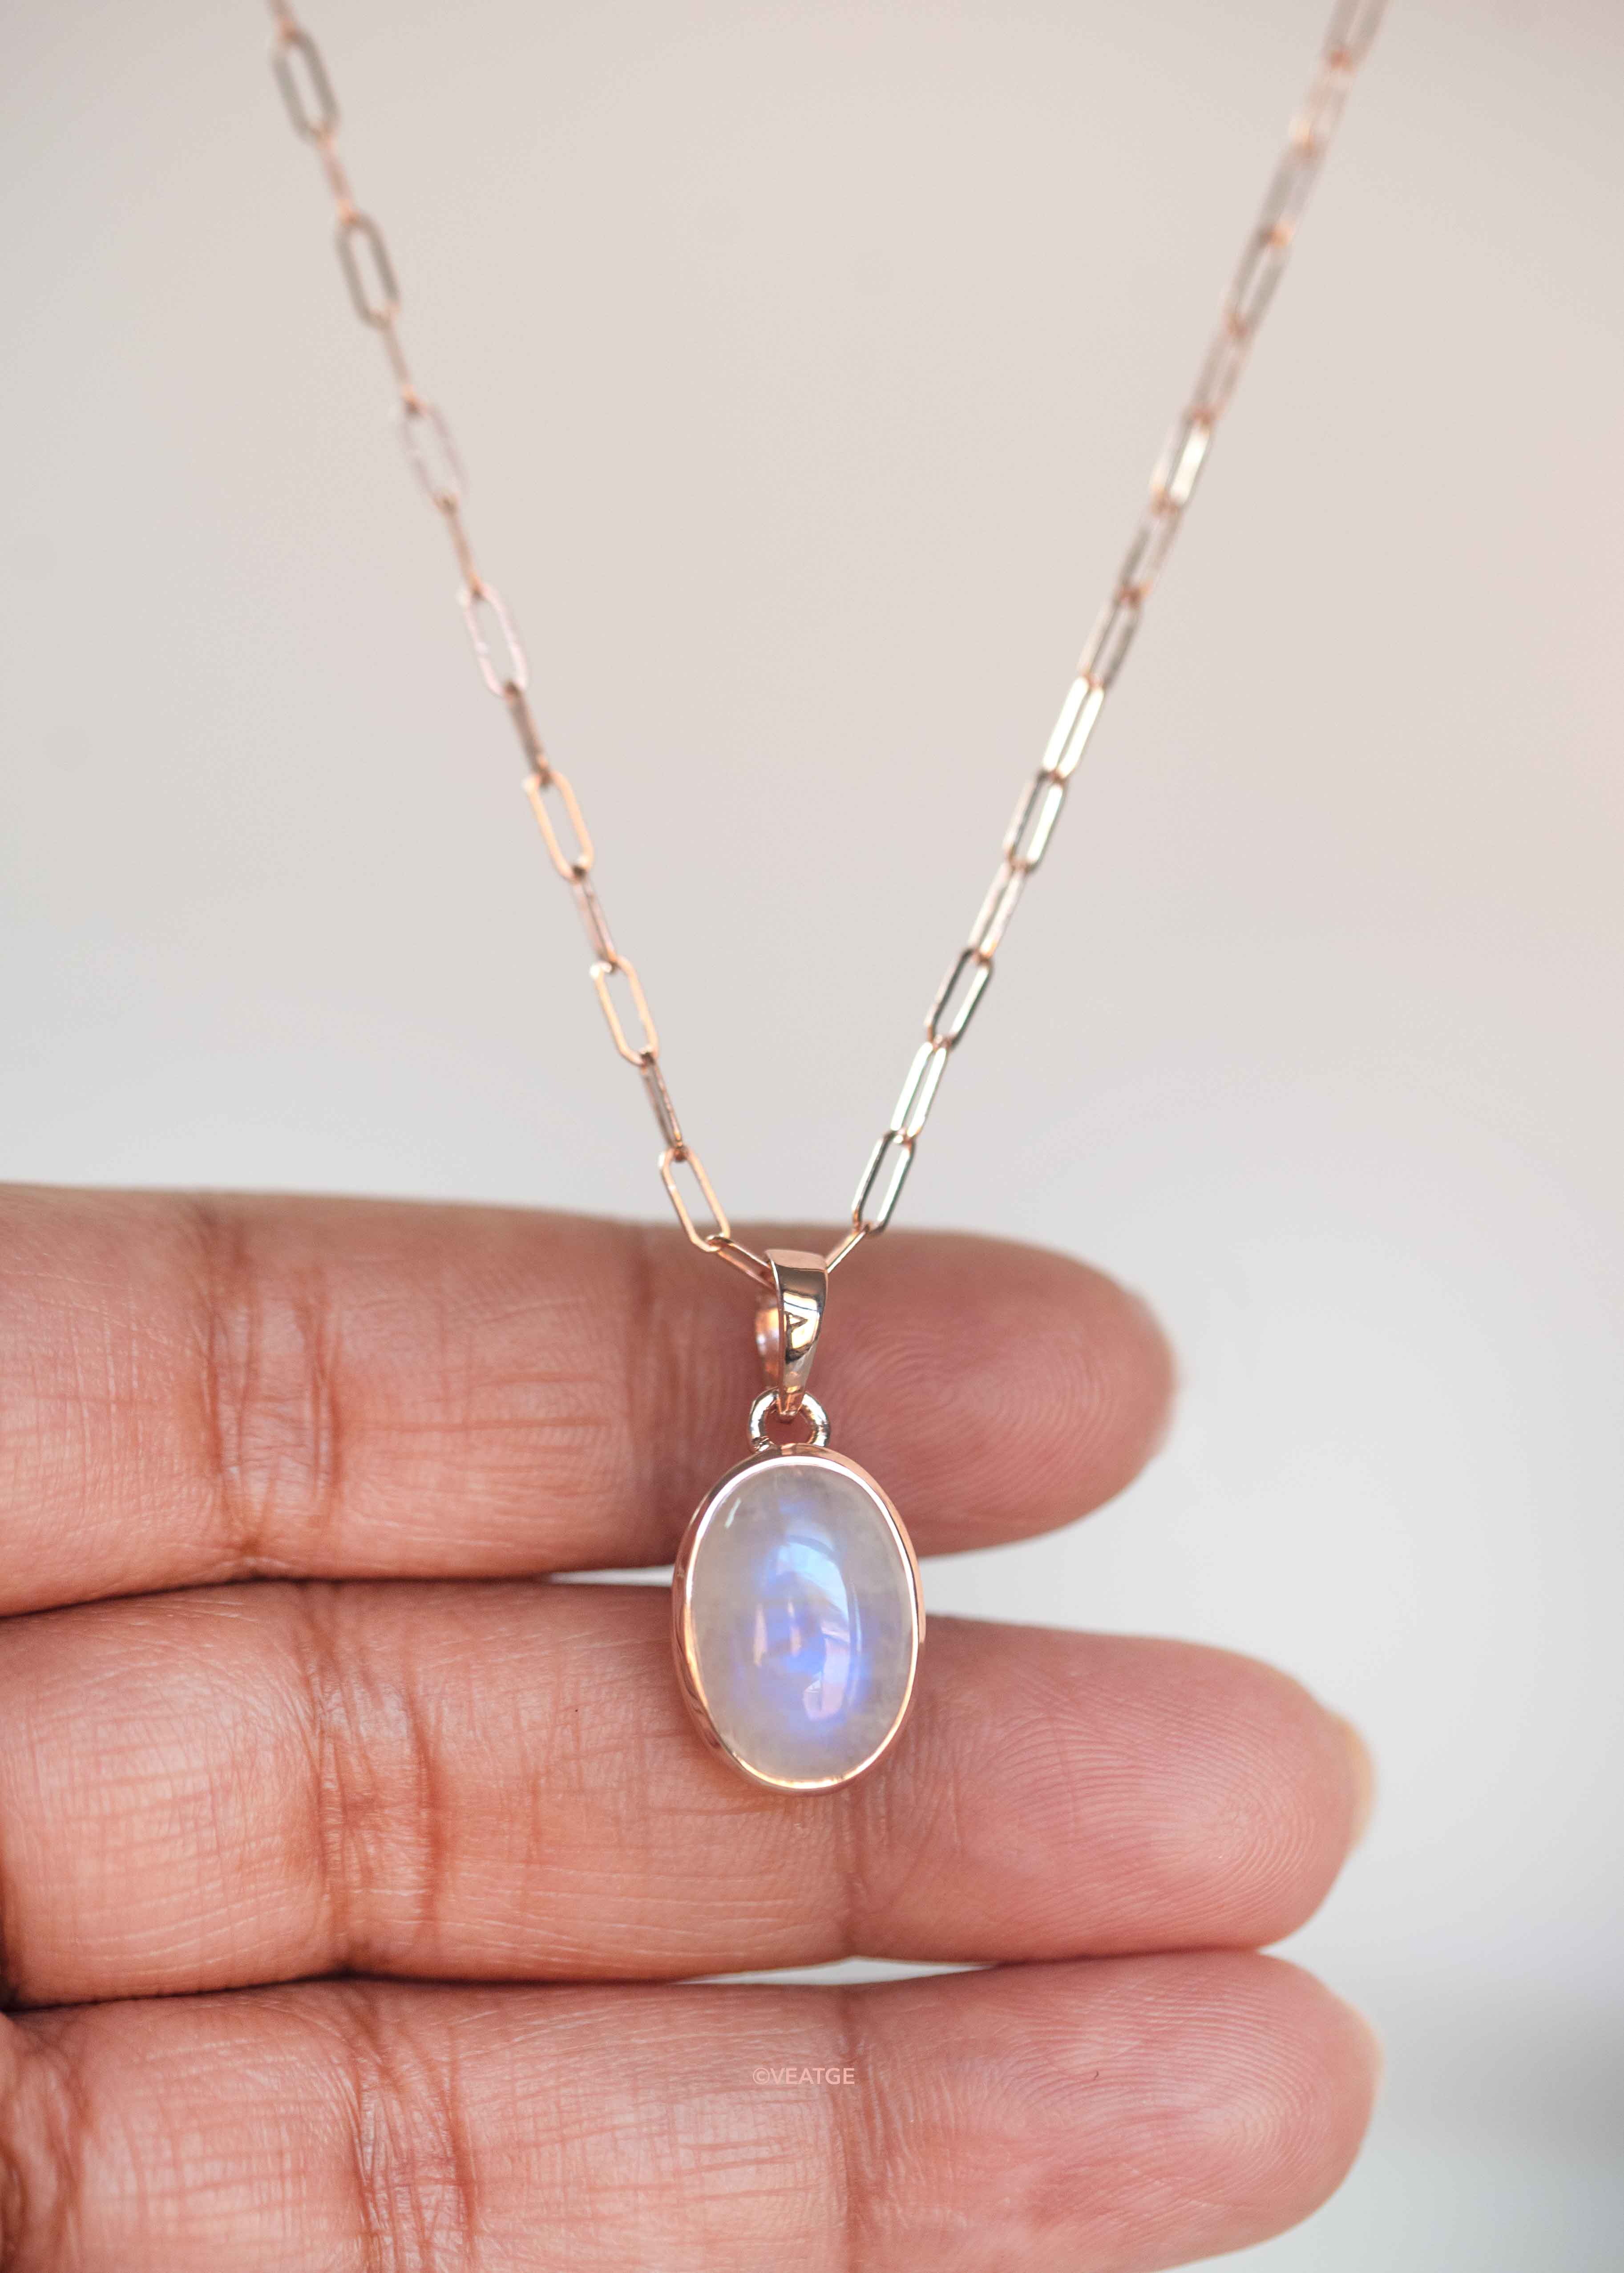 Moonstone Rose Gold Necklace June Birthstone Real Genuine Gemstone Gifts for women friend wife girlfriend